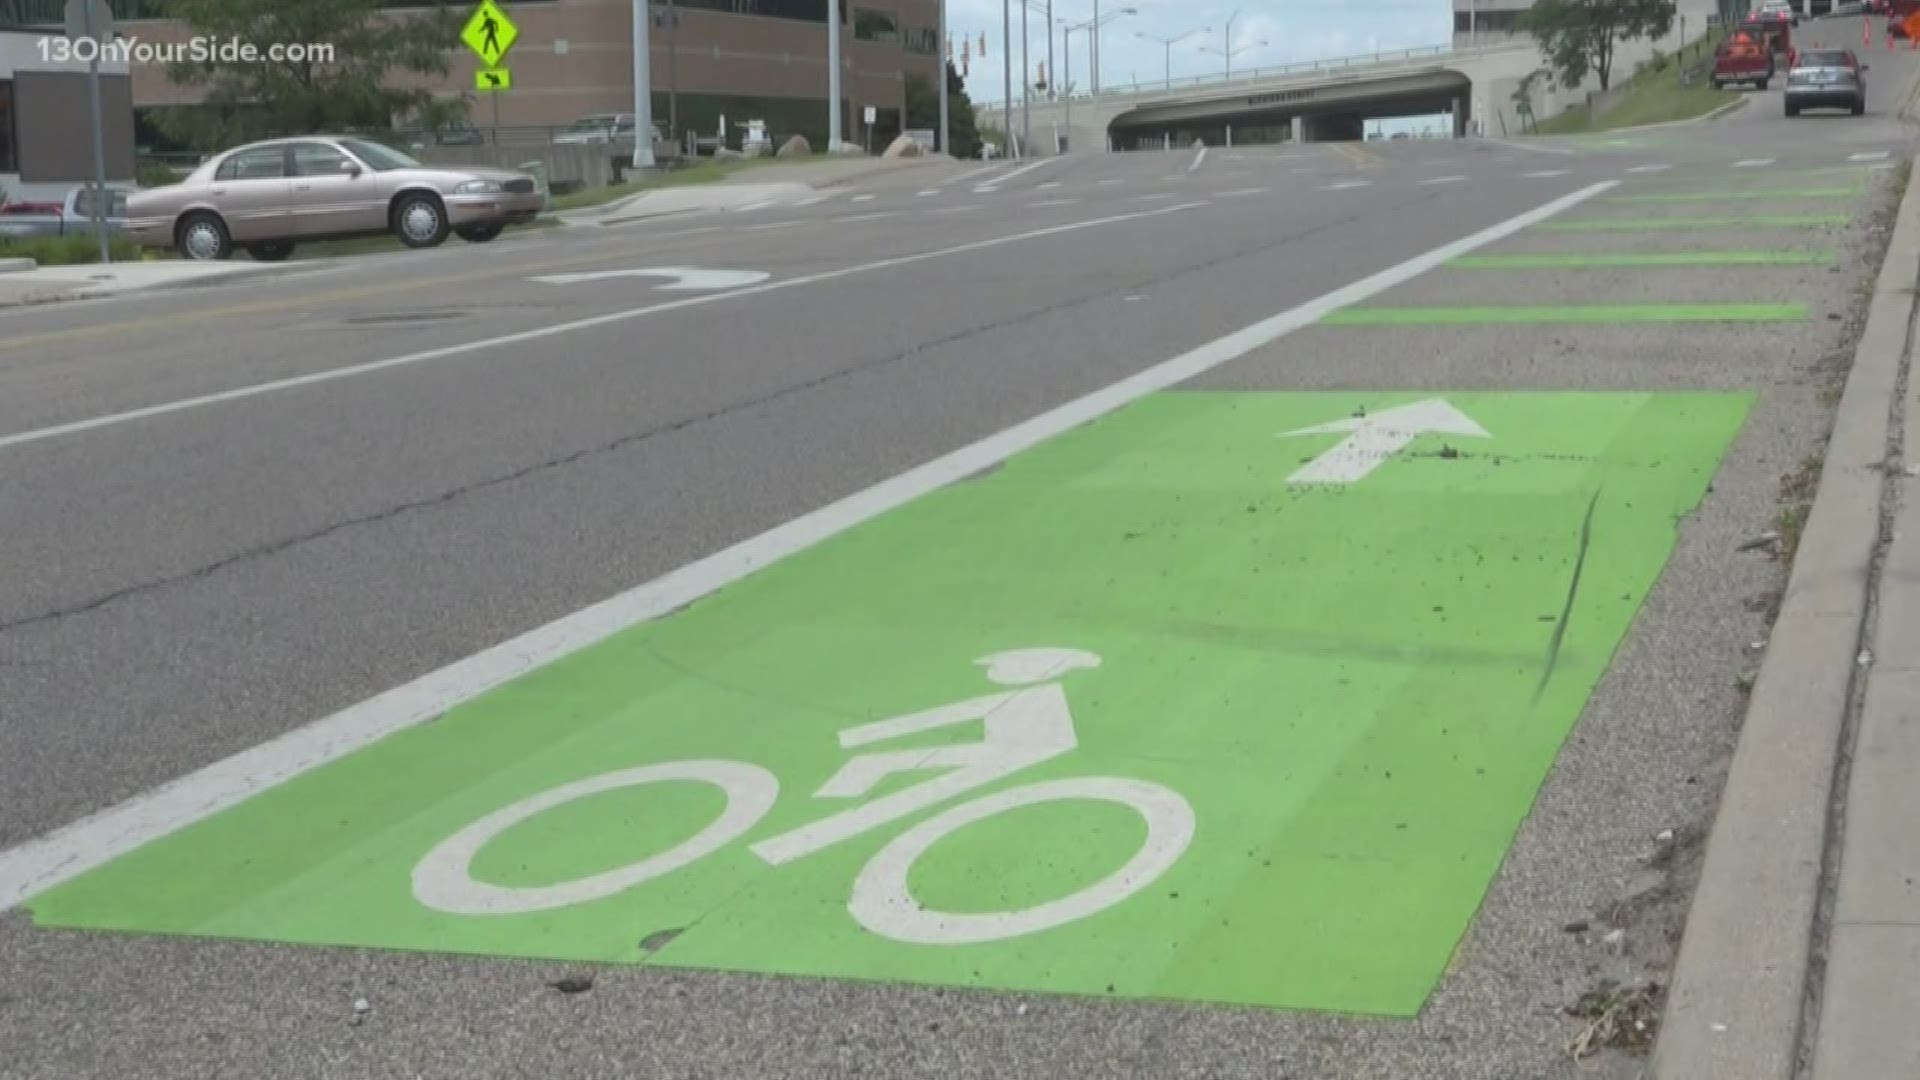 Grand Rapids adopts new bicycle action plan